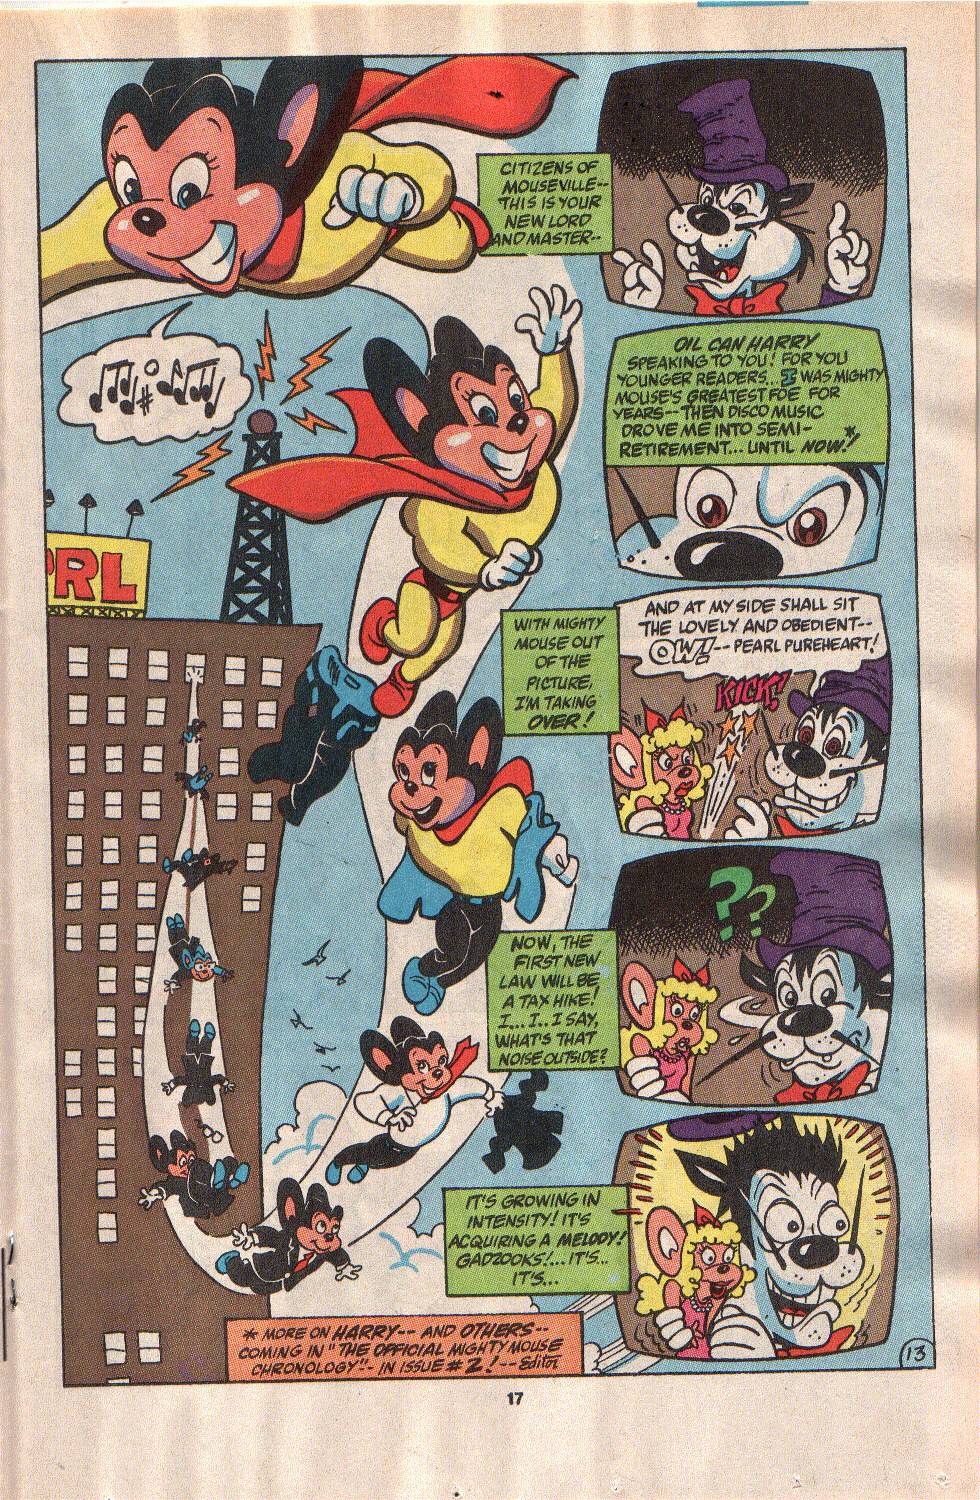 Mighty Mouse Issue 1 | Read Mighty Mouse Issue 1 comic online in high  quality. Read Full Comic online for free - Read comics online in high  quality .|viewcomiconline.com